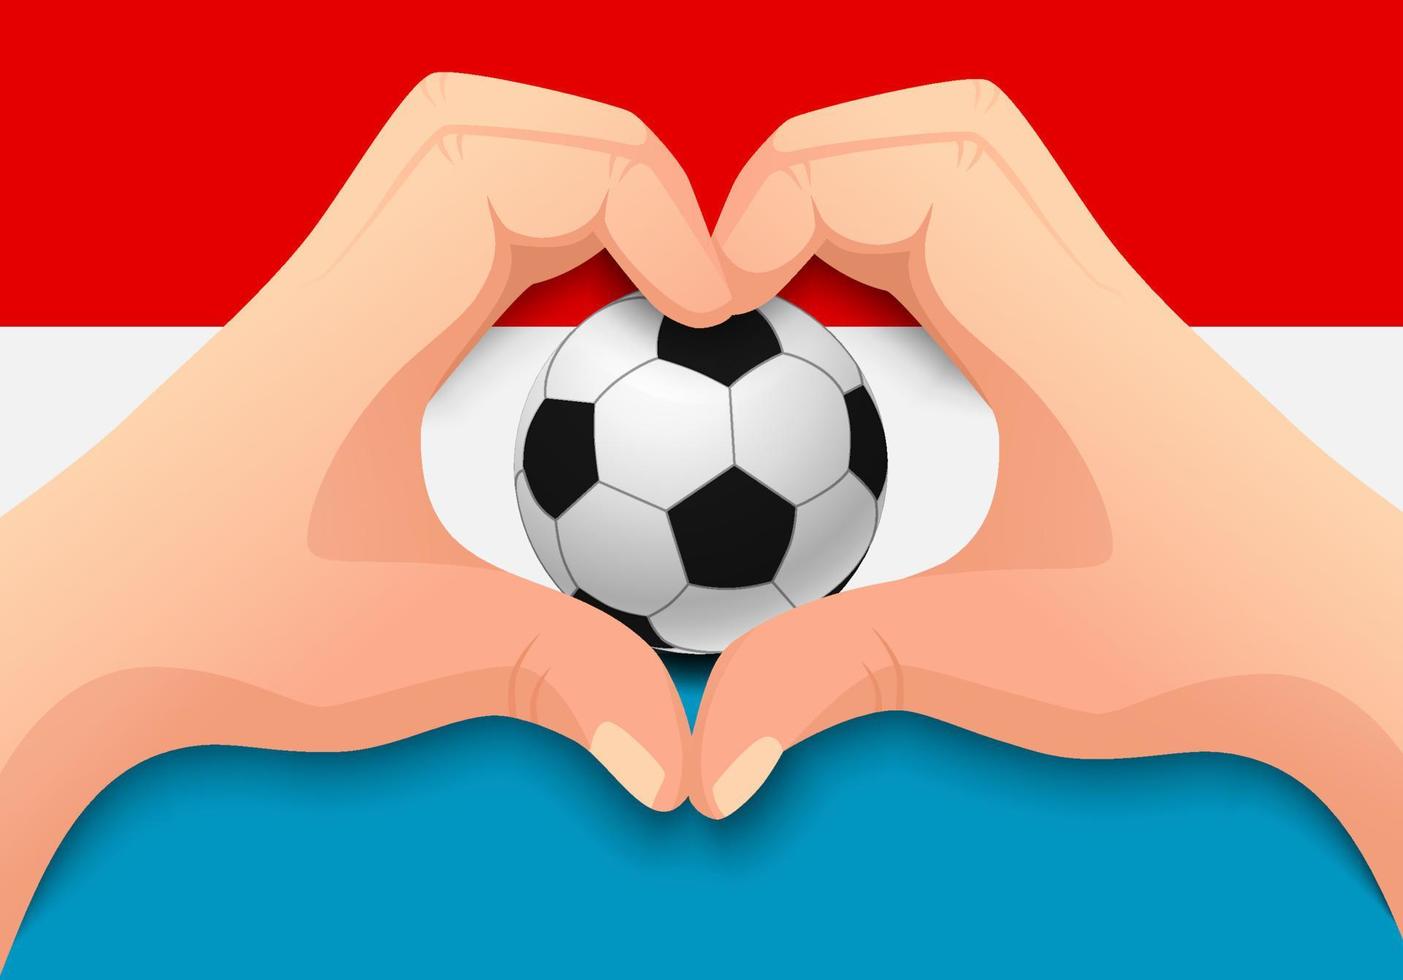 luxembourg soccer ball and hand heart shape vector